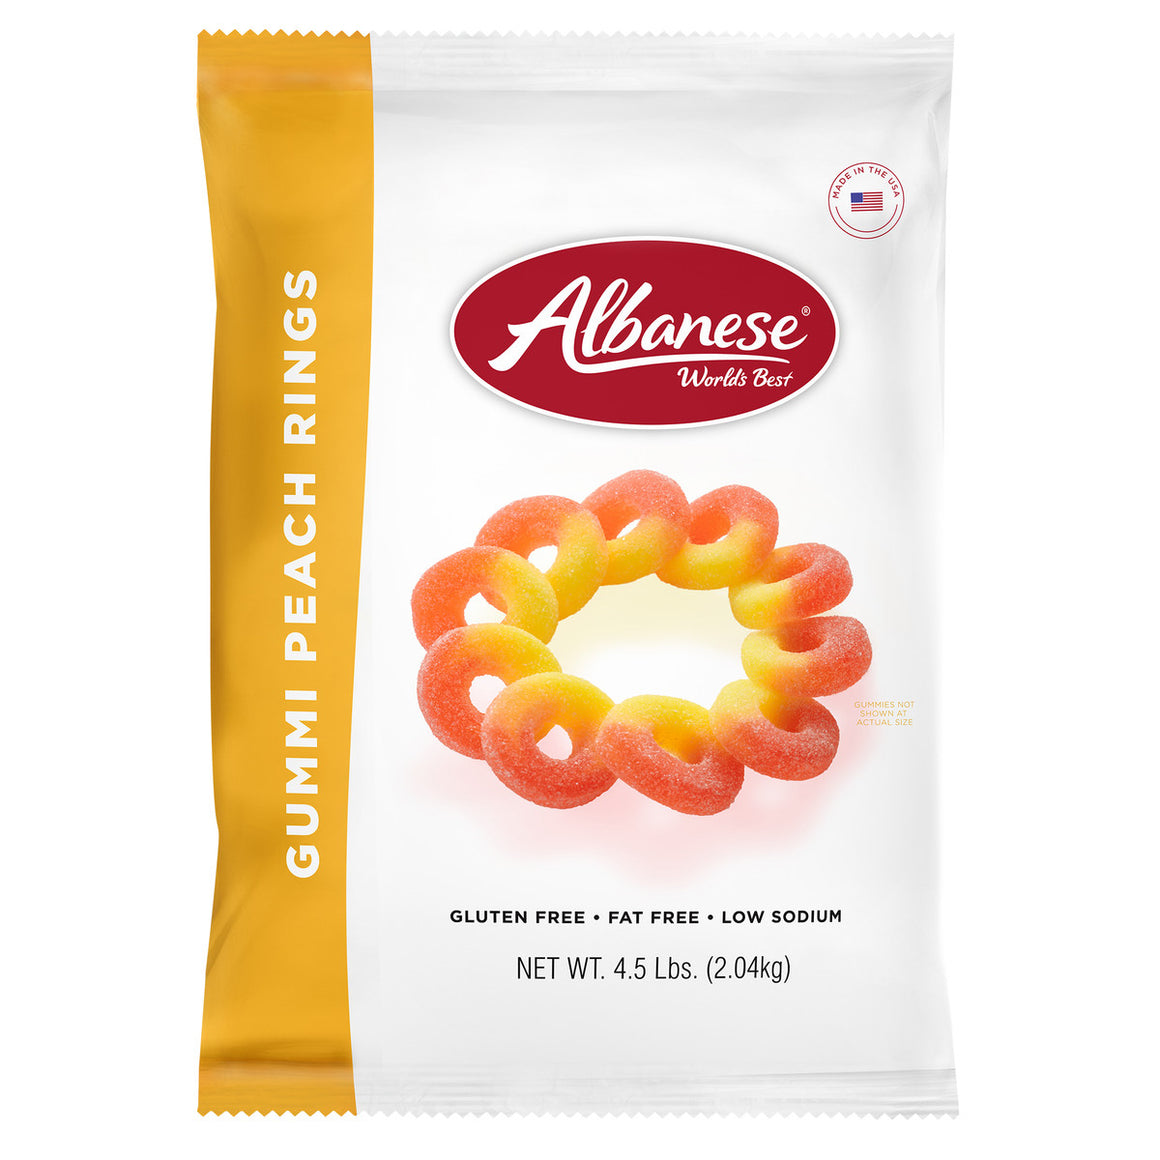 All City Candy Peach Gummi Rings - 4.5 LB Bulk Bag Bulk Unwrapped Albanese Confectionery For fresh candy and great service, visit www.allcitycandy.com